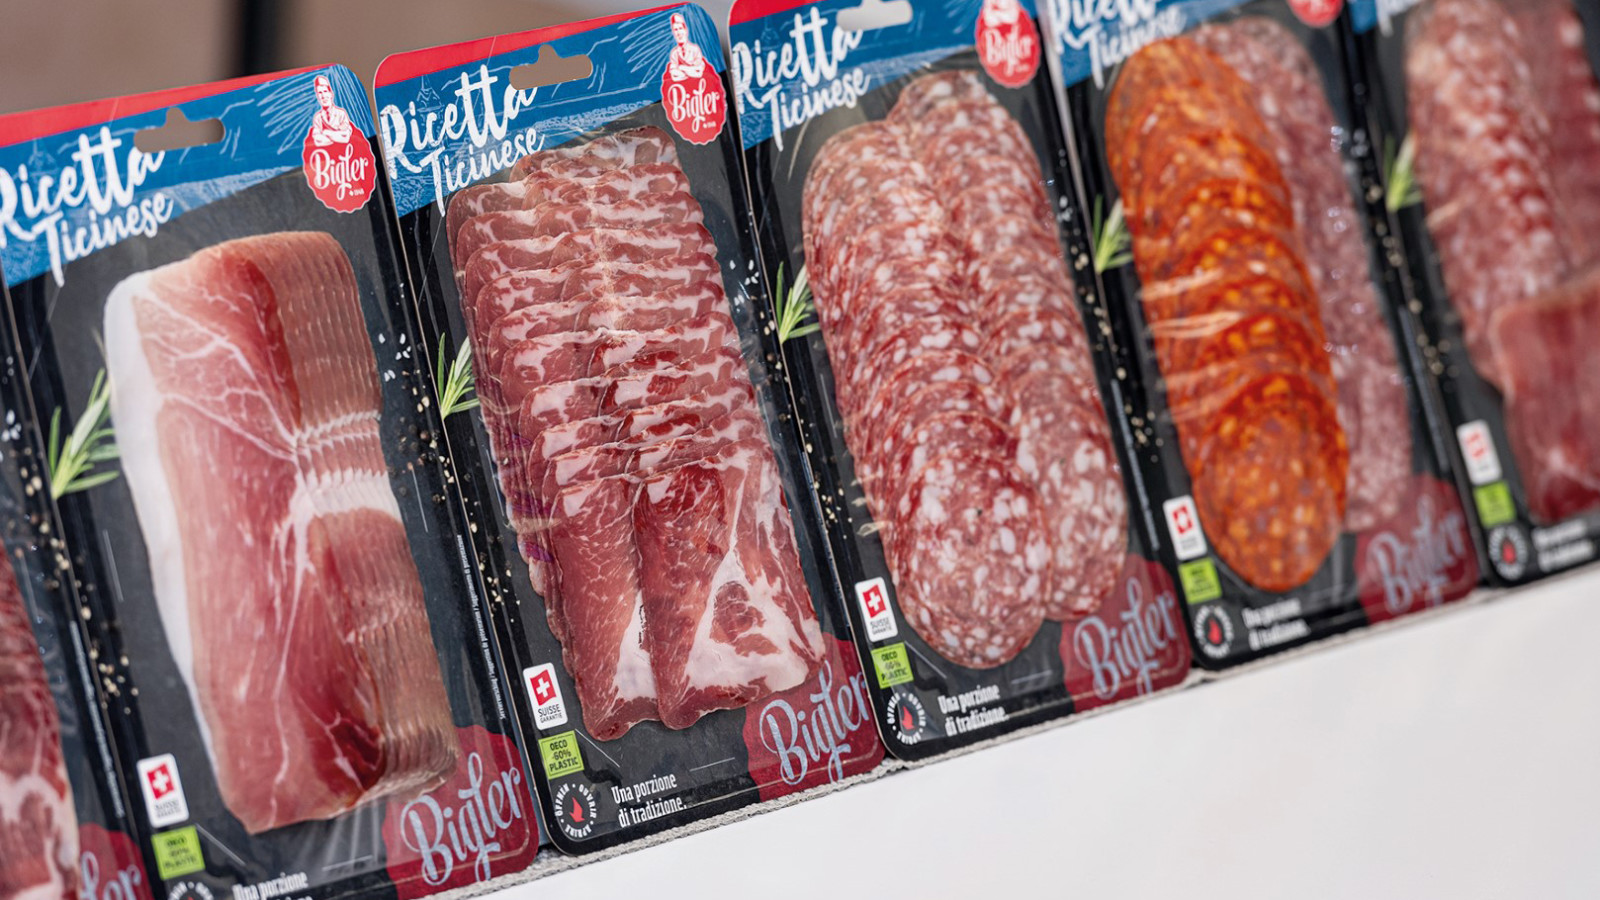 FlatMap from Nemco is the perfect solution for highlighting the product in the refrigerated display. We have a wide range of meat packaging, including for sausages, meats, and salami, several of which are reusable or plastic-reduced skin pack products.